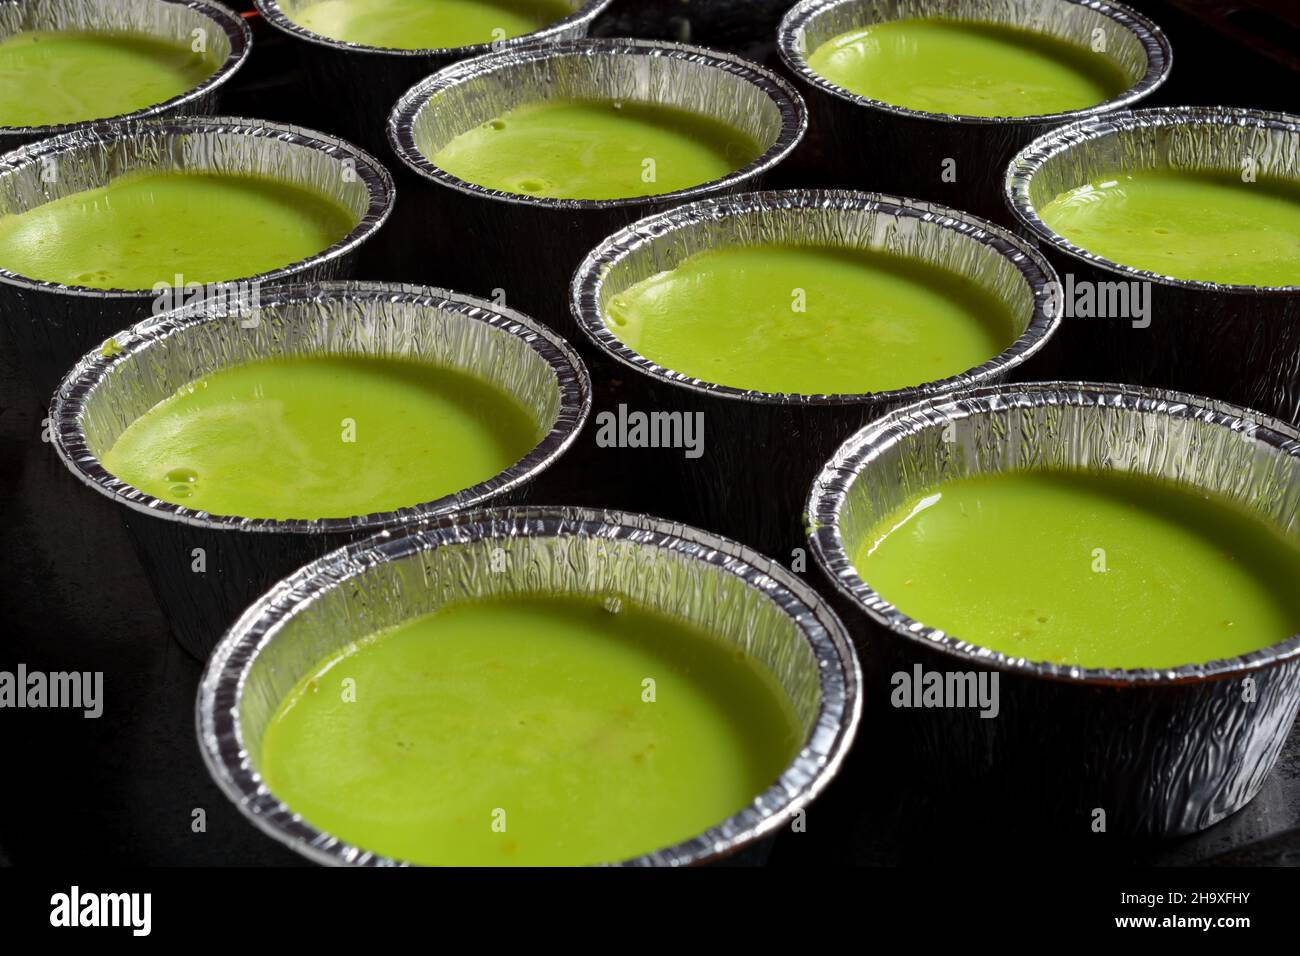 Pistachio puddings in aluminium foil moulds. Focus stacked images in order to get more DOF. Stock Photo